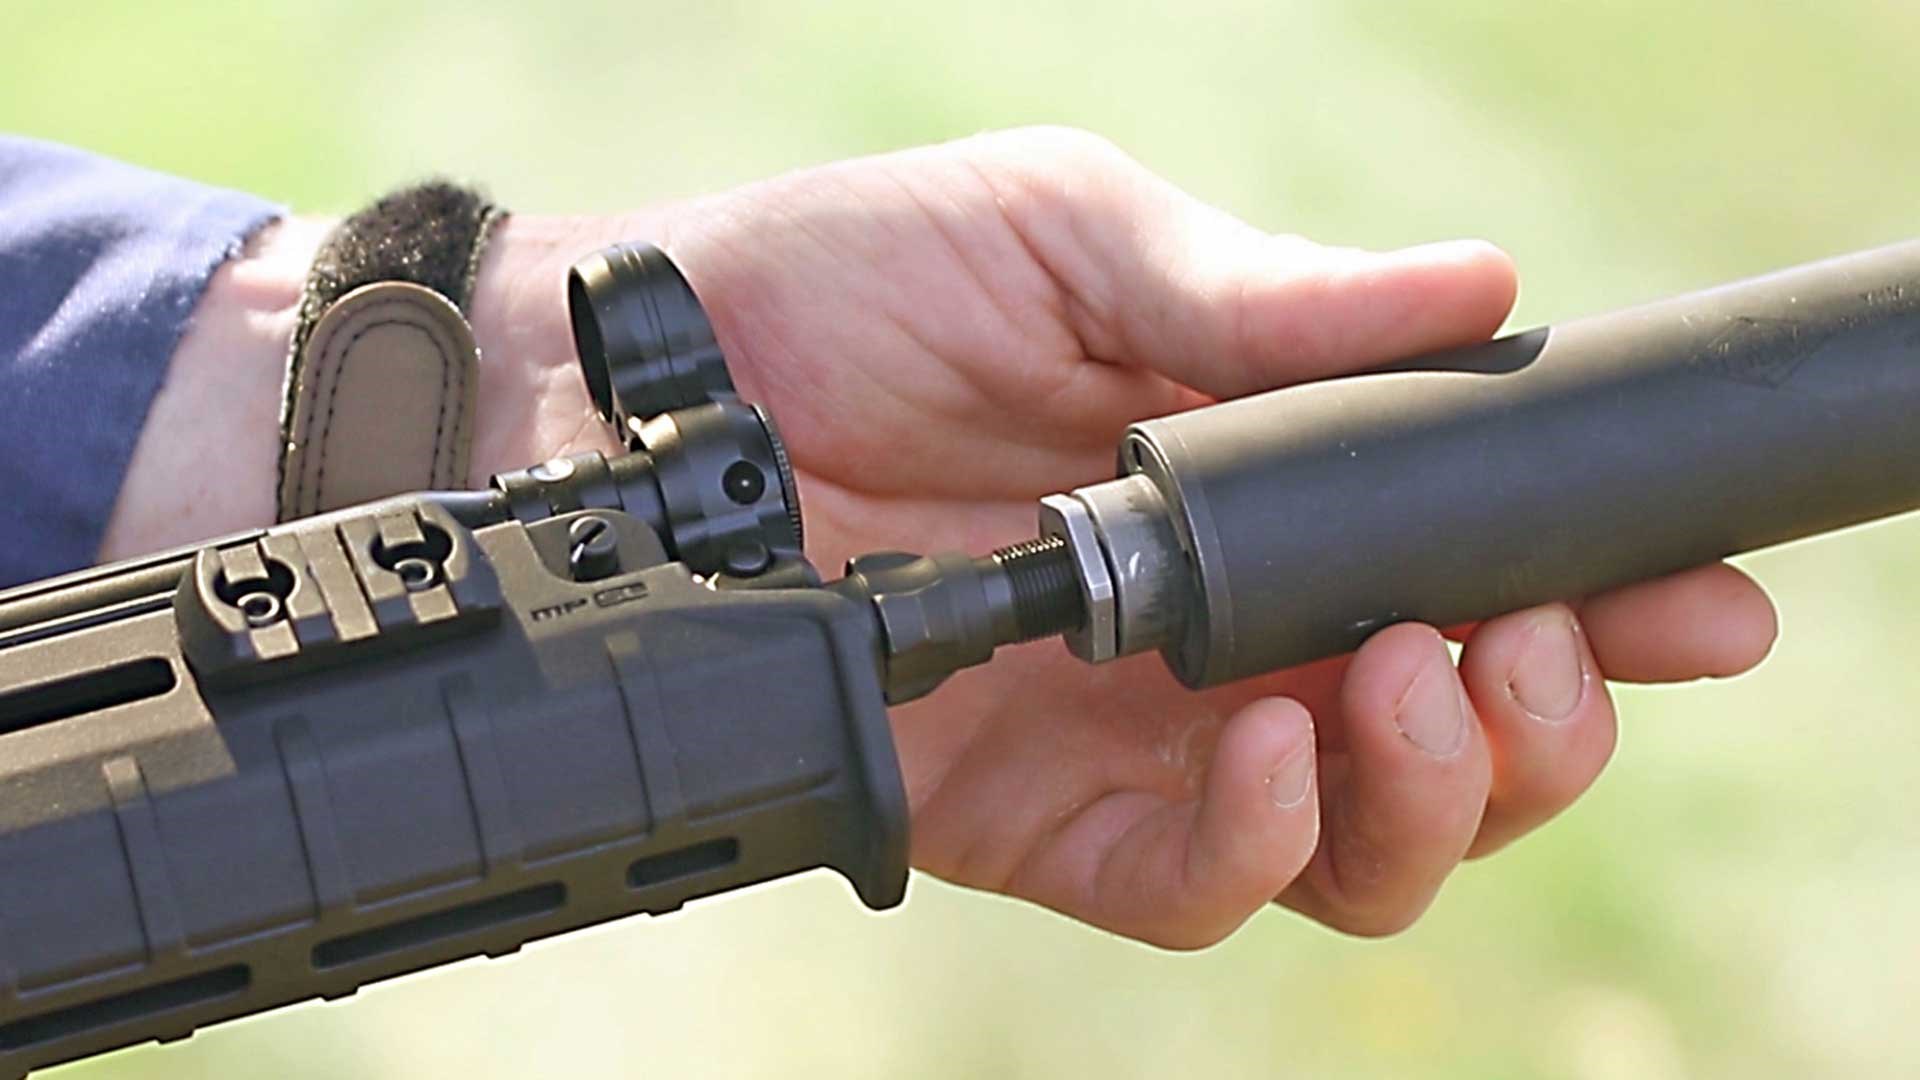 A user's hand mounting a suppressor onto an MP5.